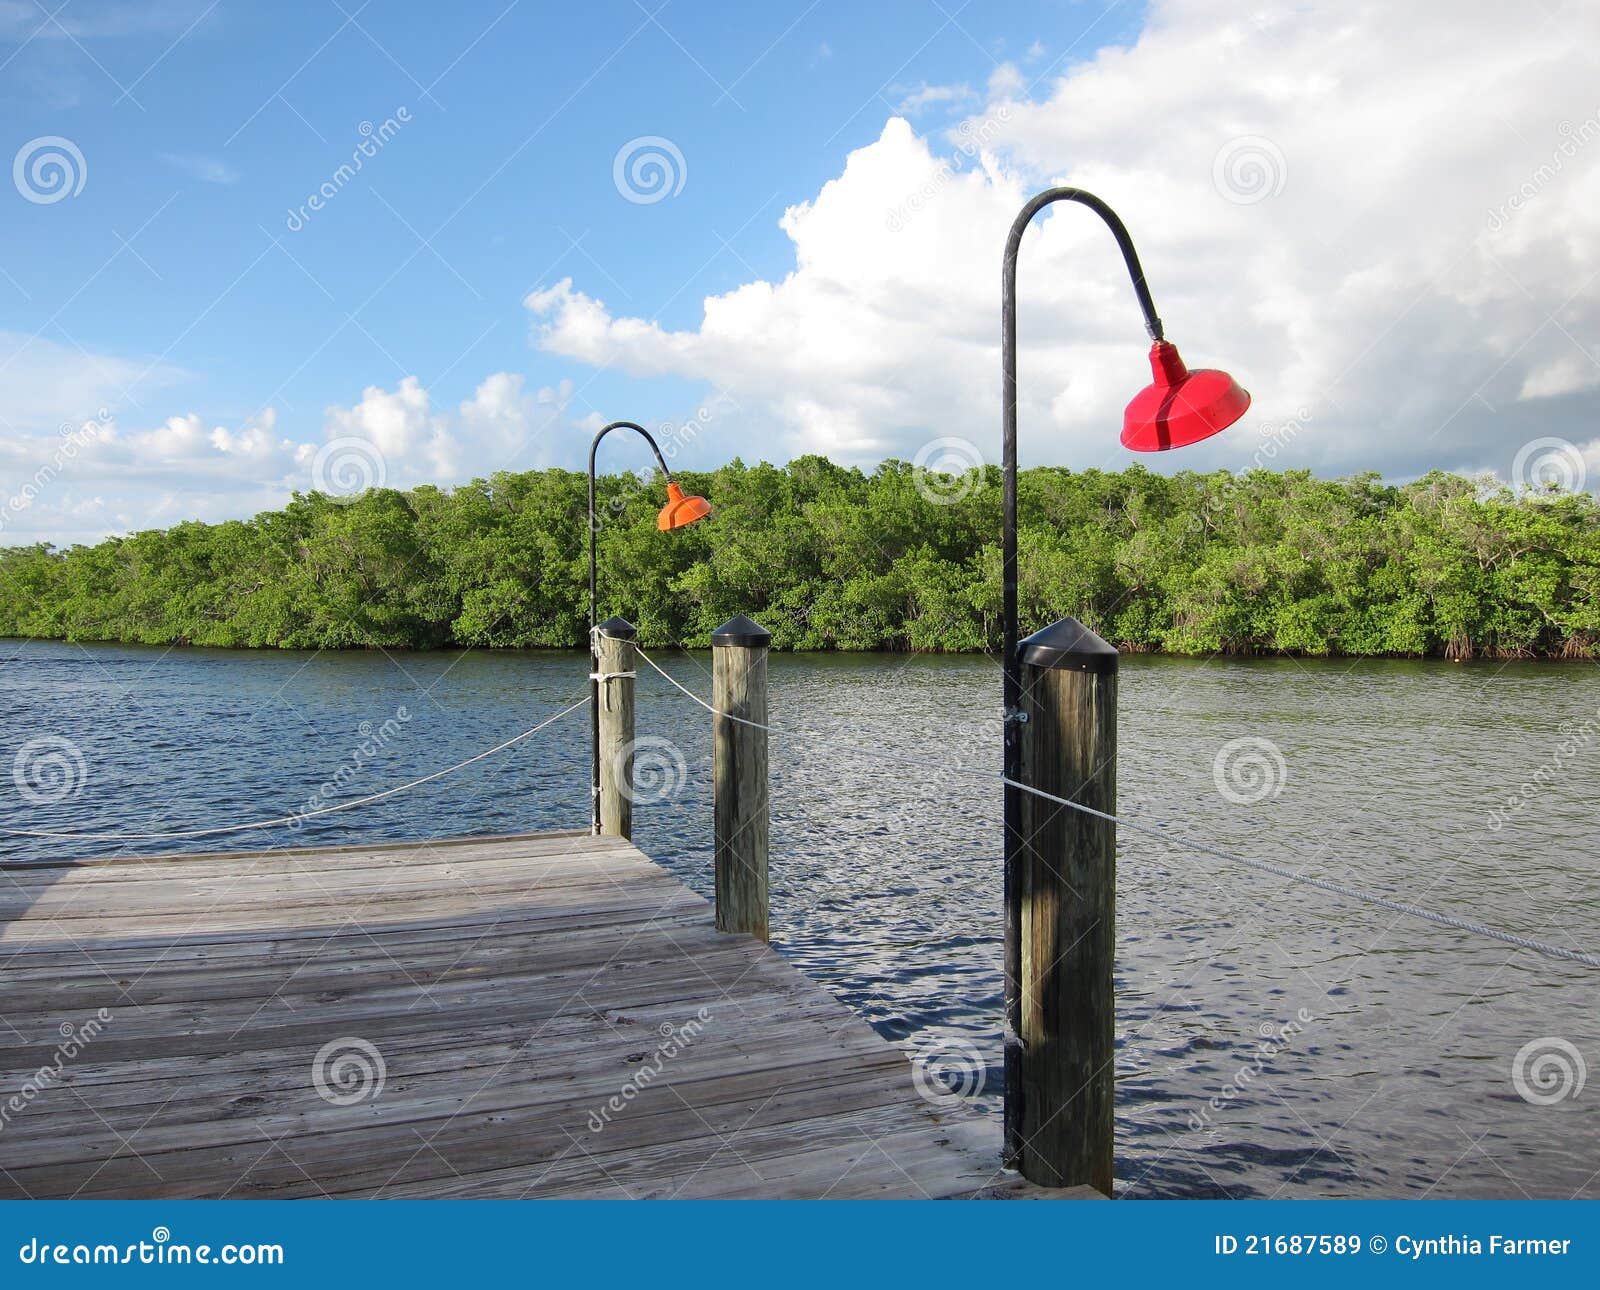 Old Wooden Boat Dock In Naples Florida Royalty Free Stock Images 